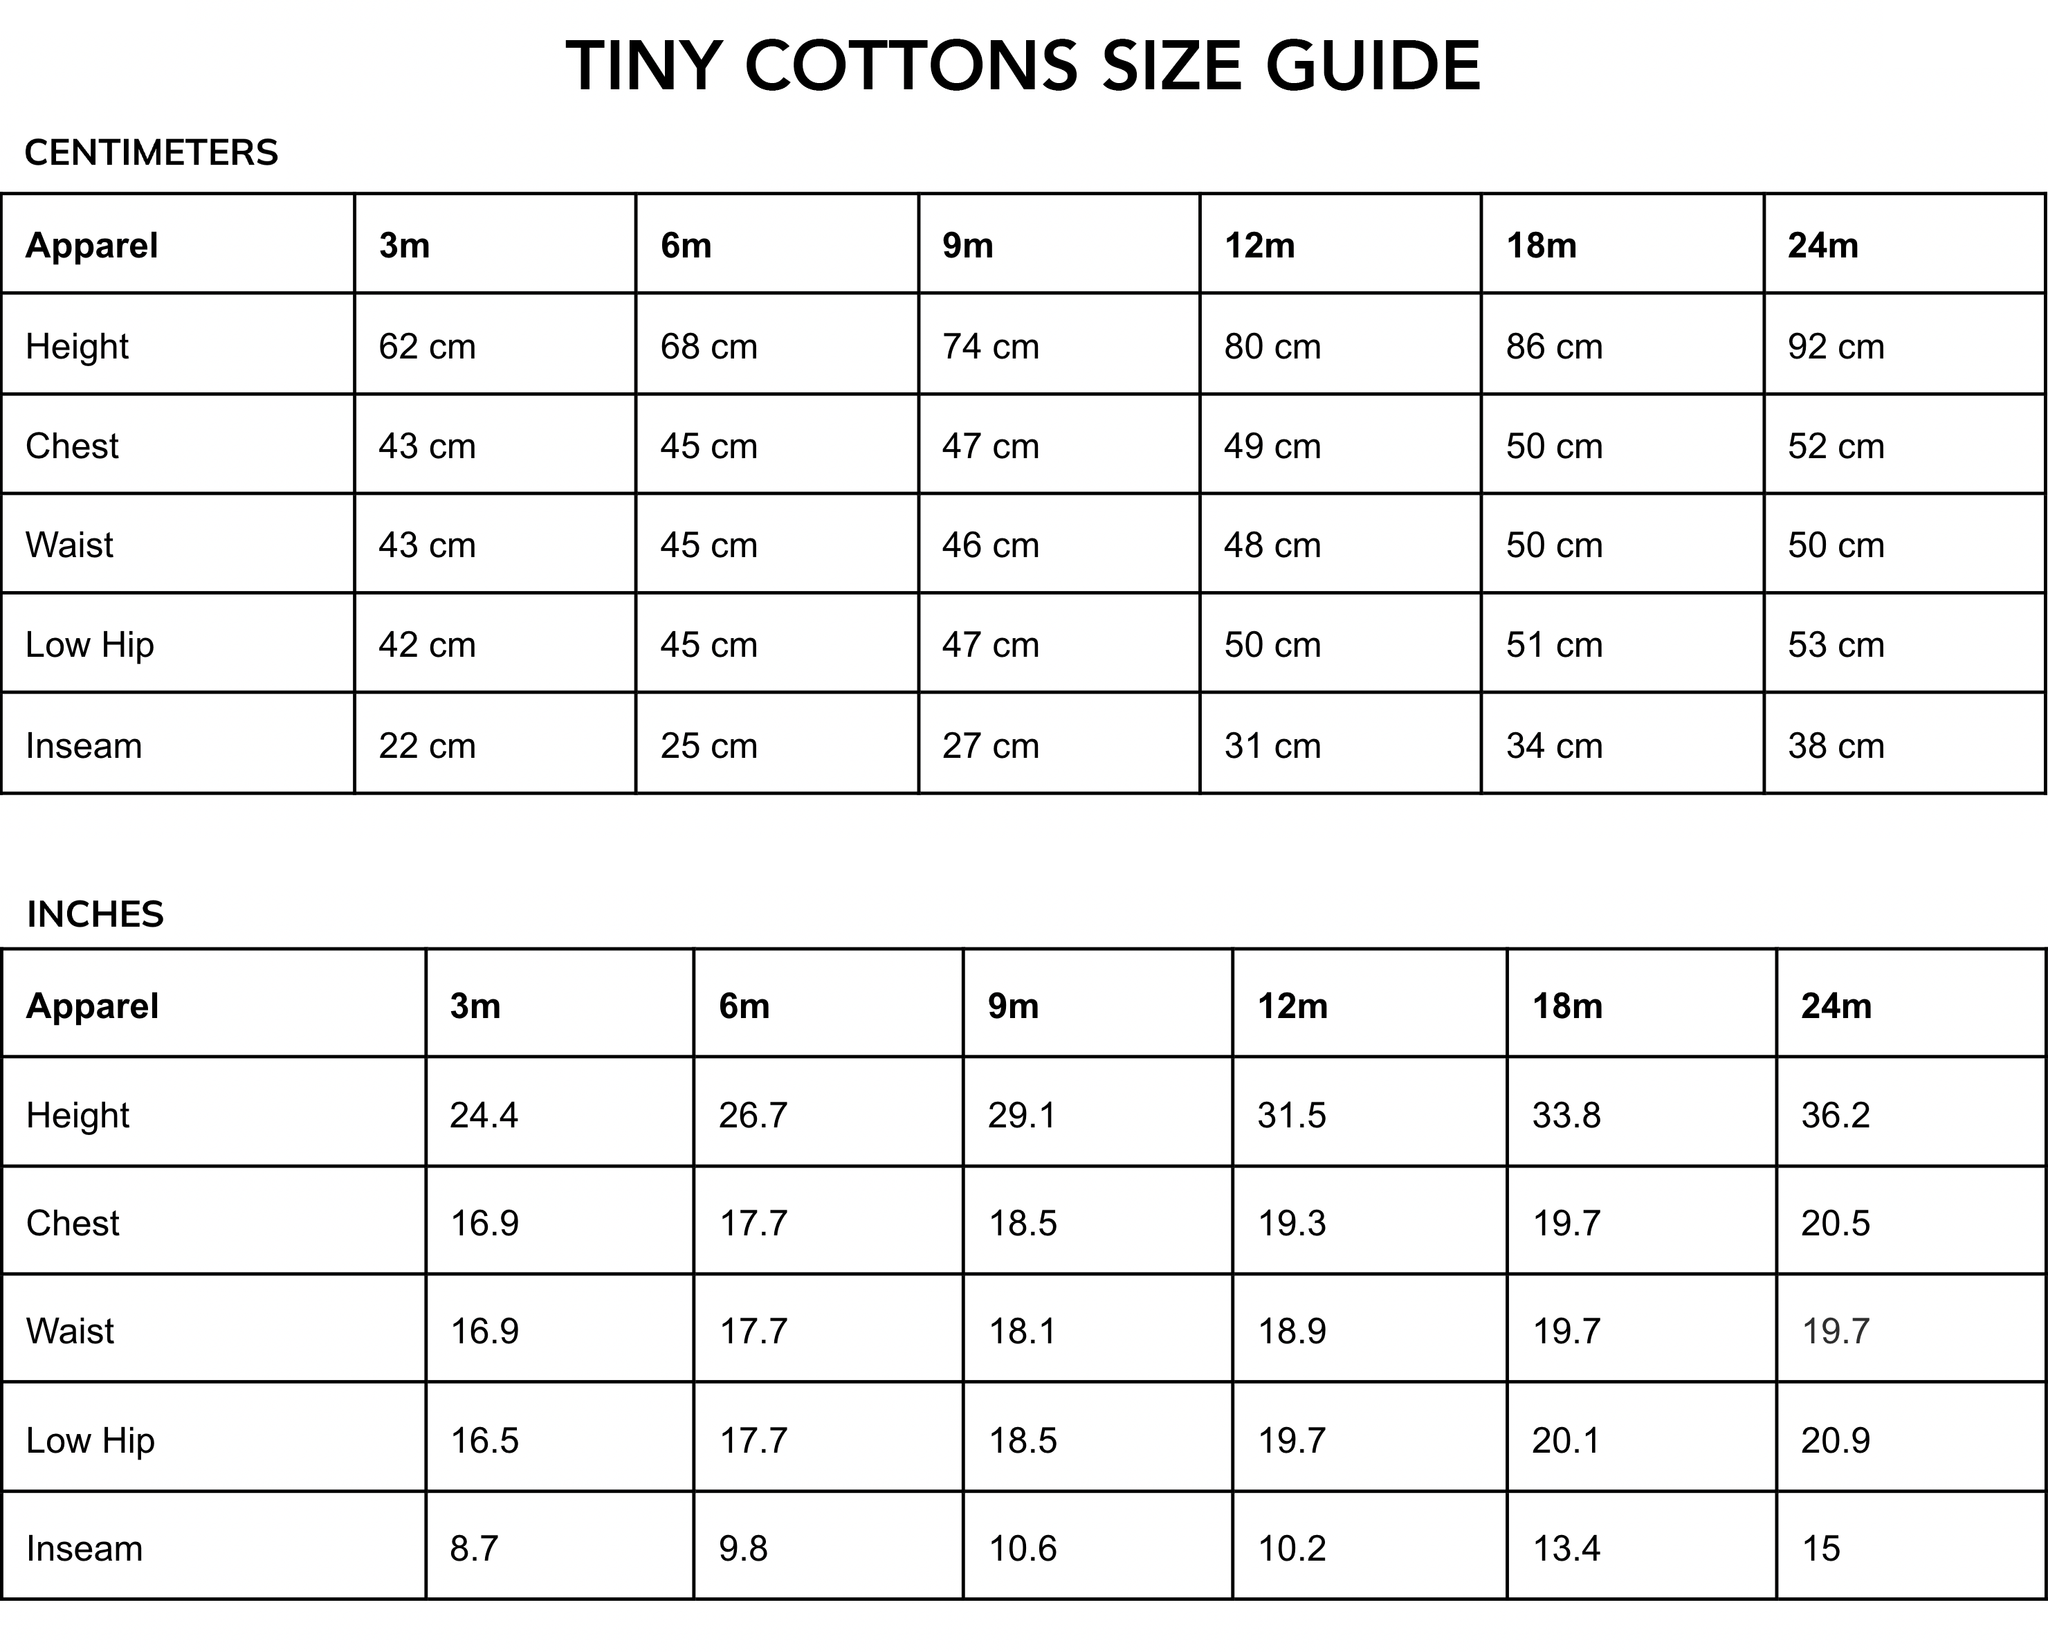 Tiny cotton baby size guide